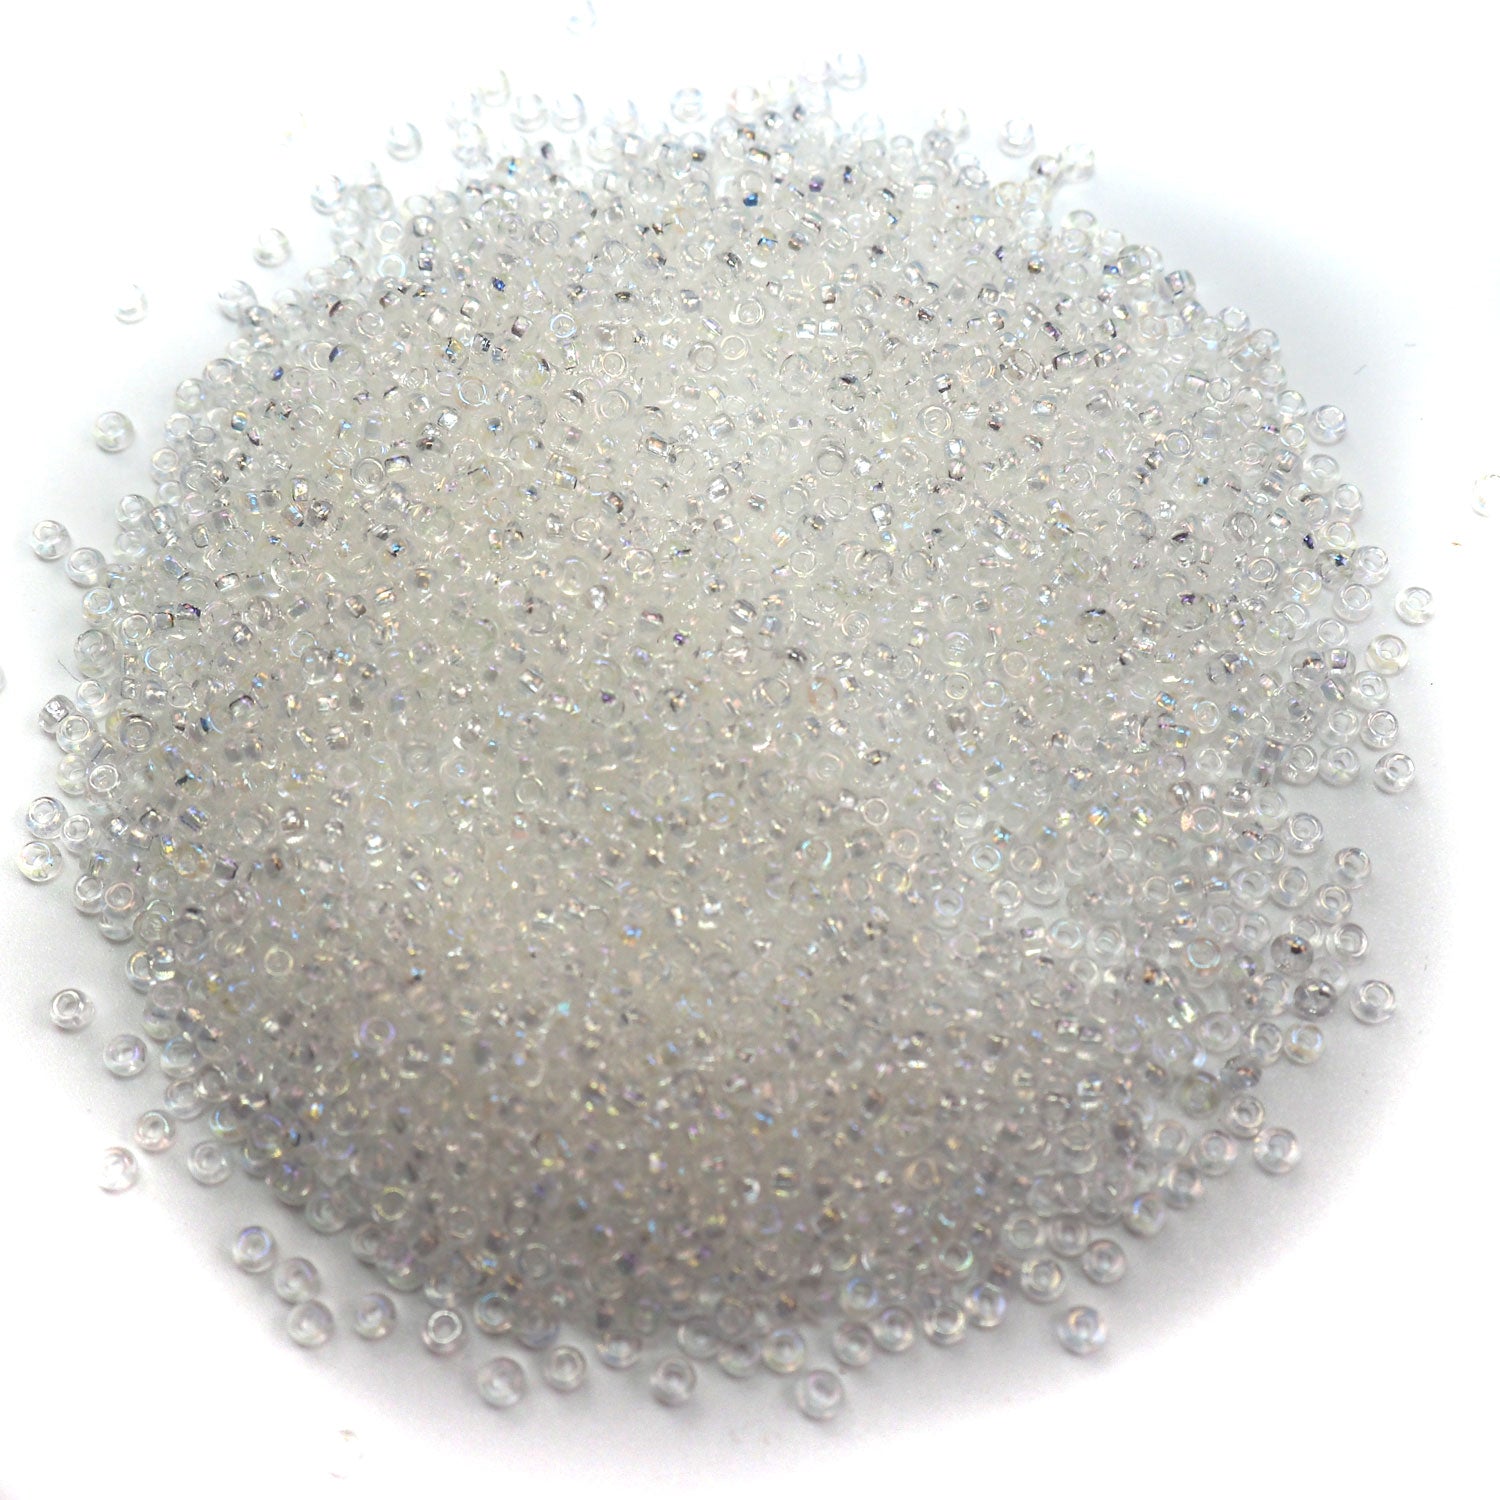 Rocailles size 9/0 (2.6mm) Crystal AB, Preciosa Ornela Traditional Czech Glass Seed Beads, 30grams (1 oz), P937